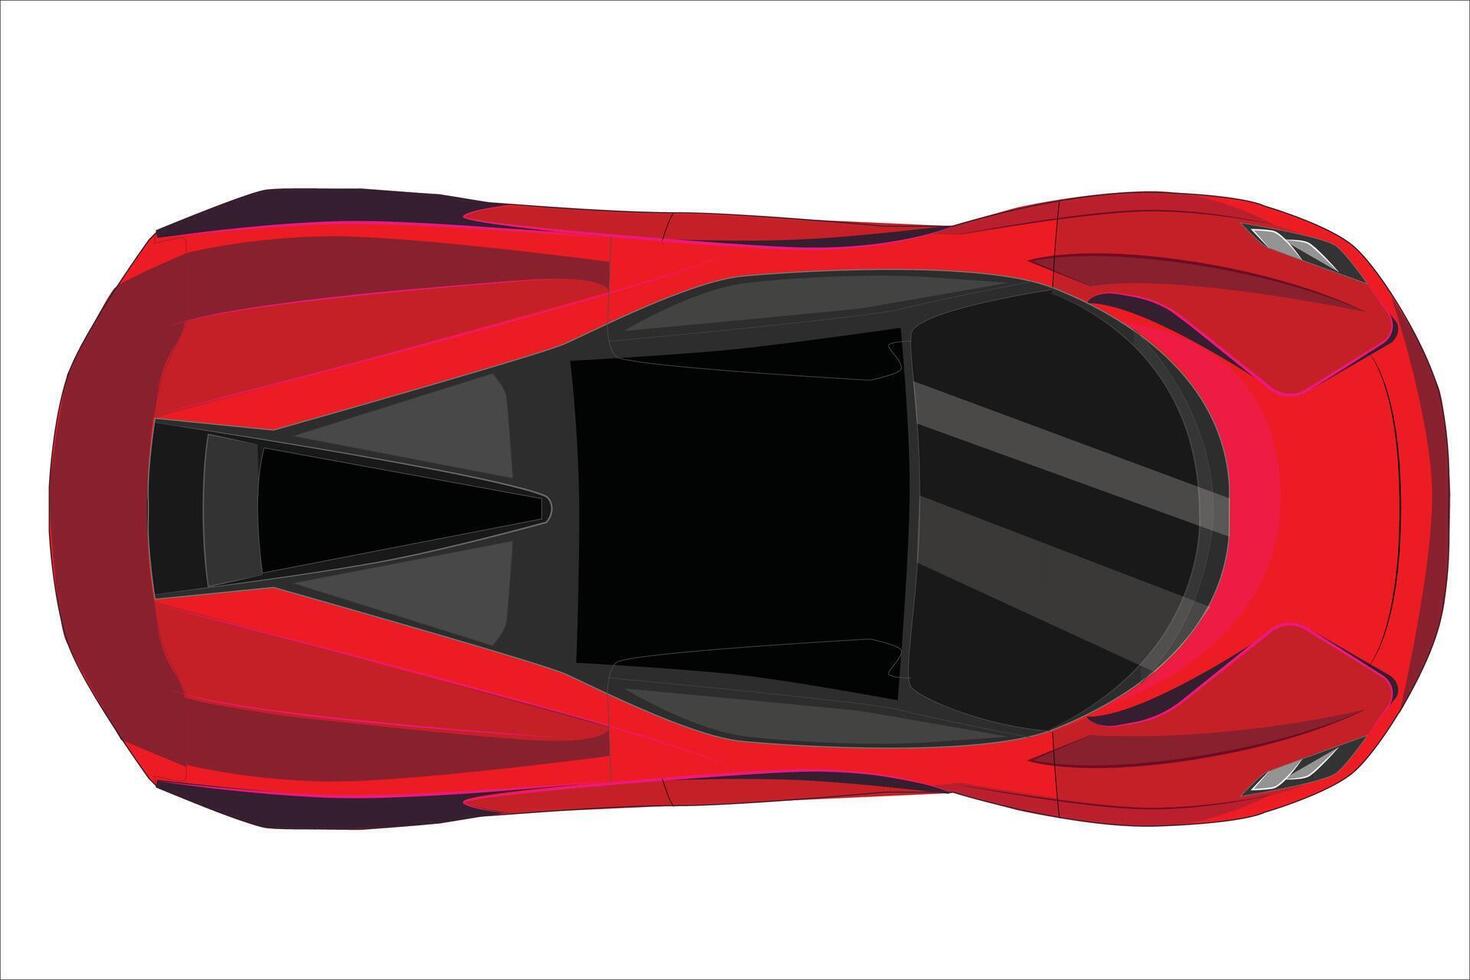 Cars set from above, top view isolated. Realistic transportation. Modern urban sport vehicle. View from a bird's eye view. Realistic car design. Flat style vector illustration.